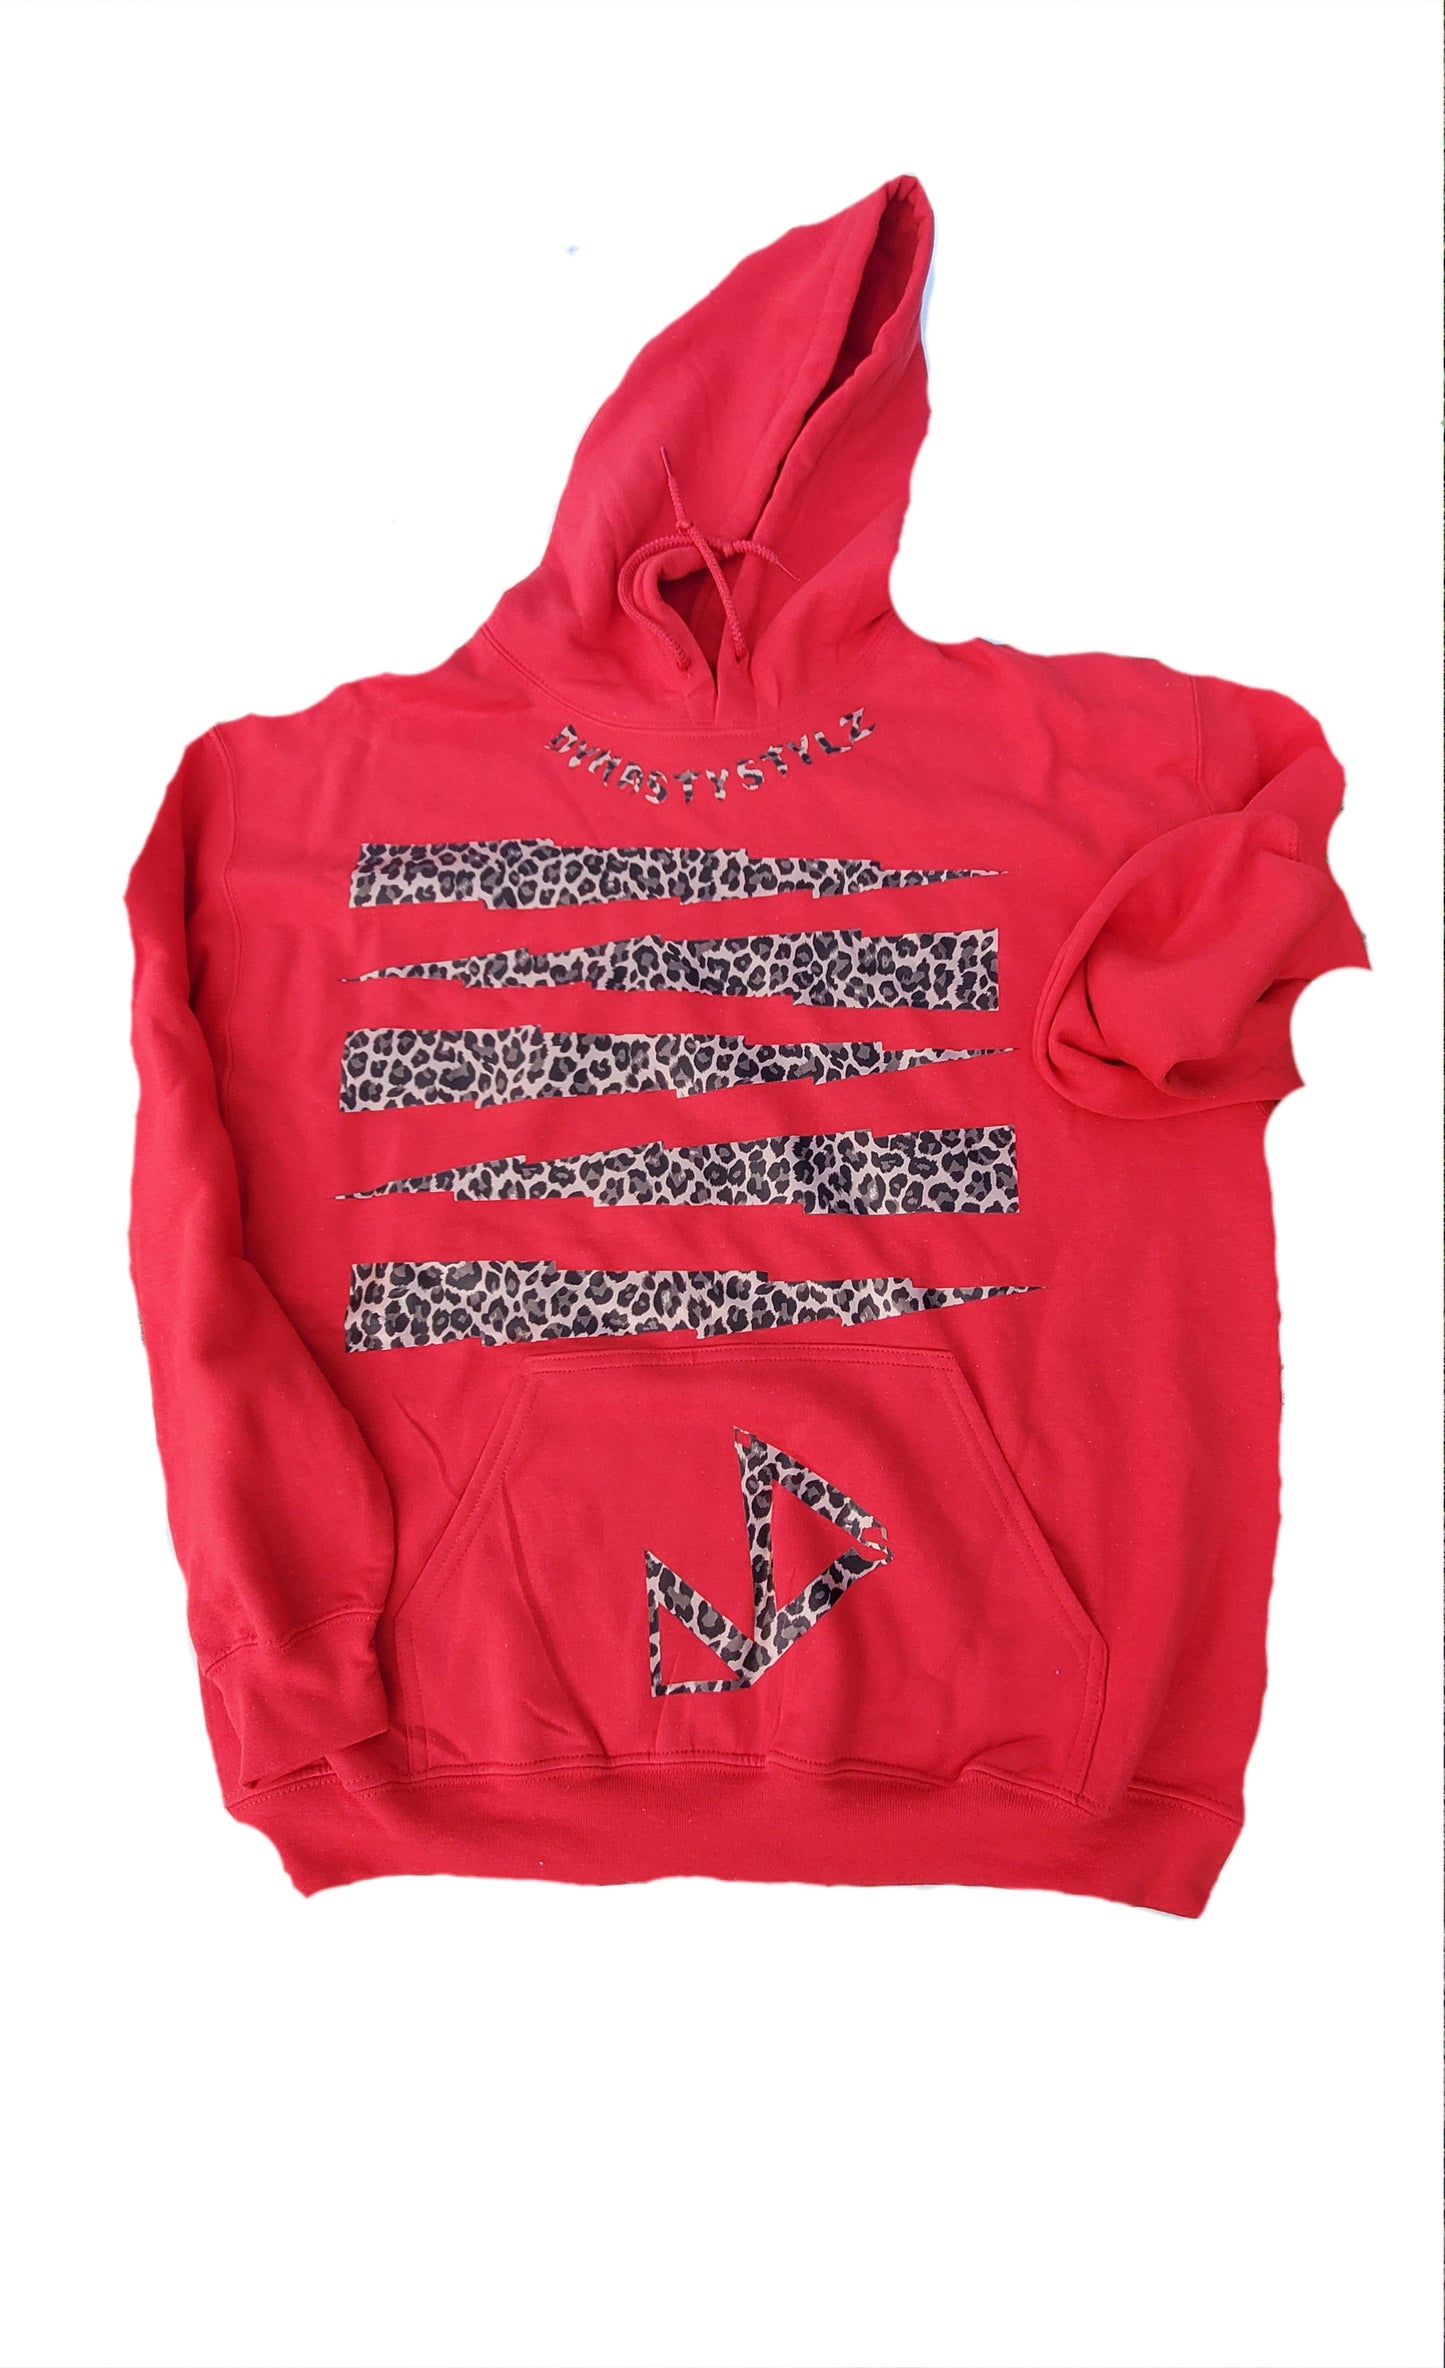 RED GOLD LEOPARD 🐆 HOODY